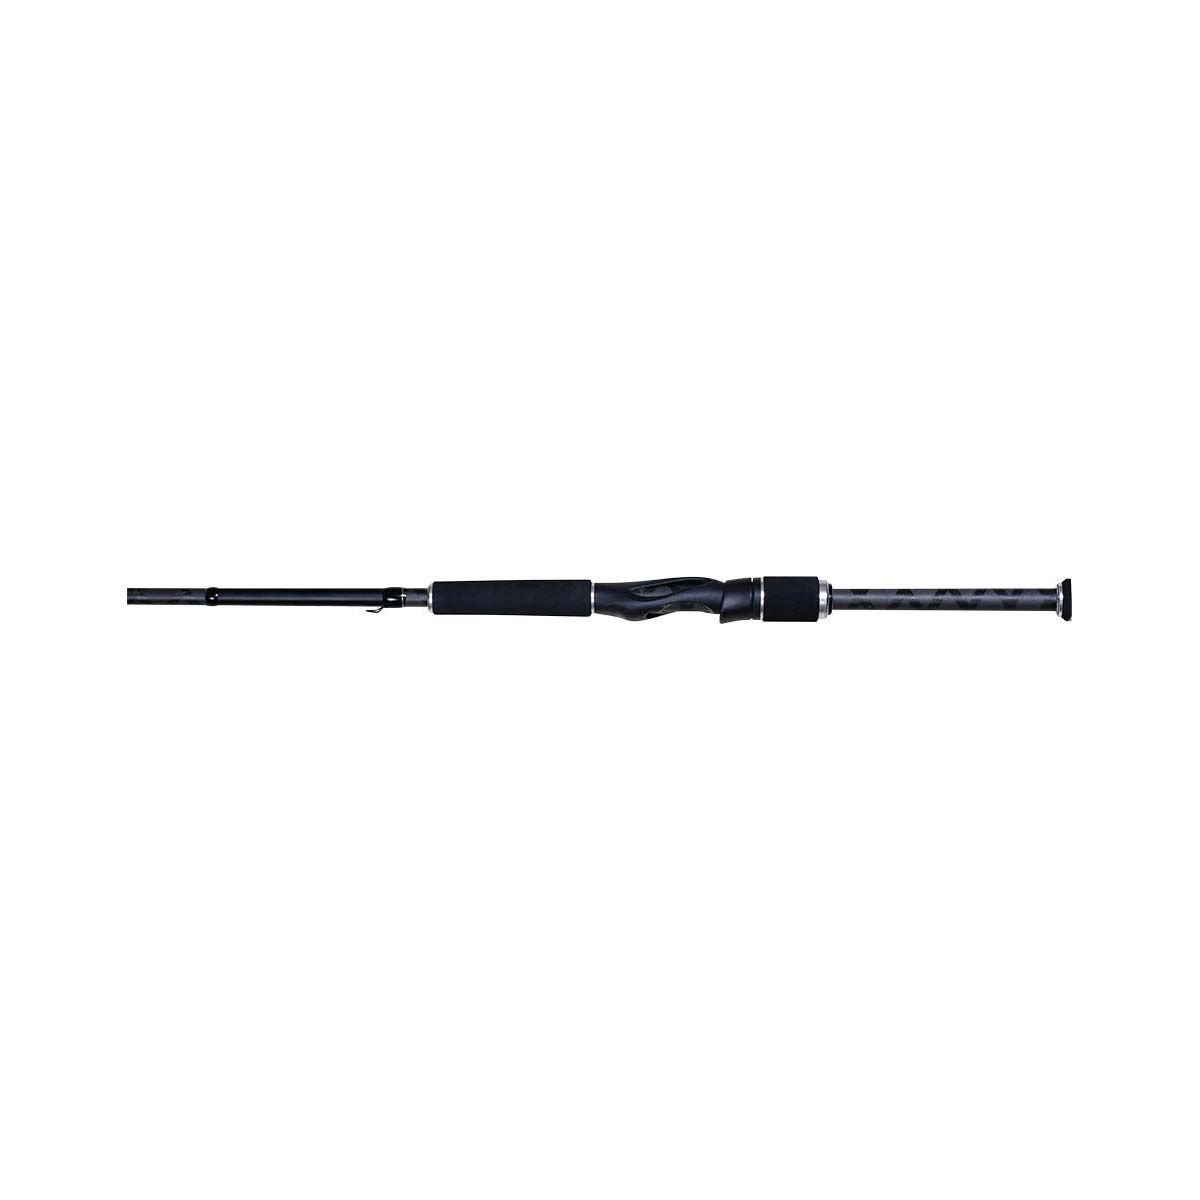 Shimano rod for Sale